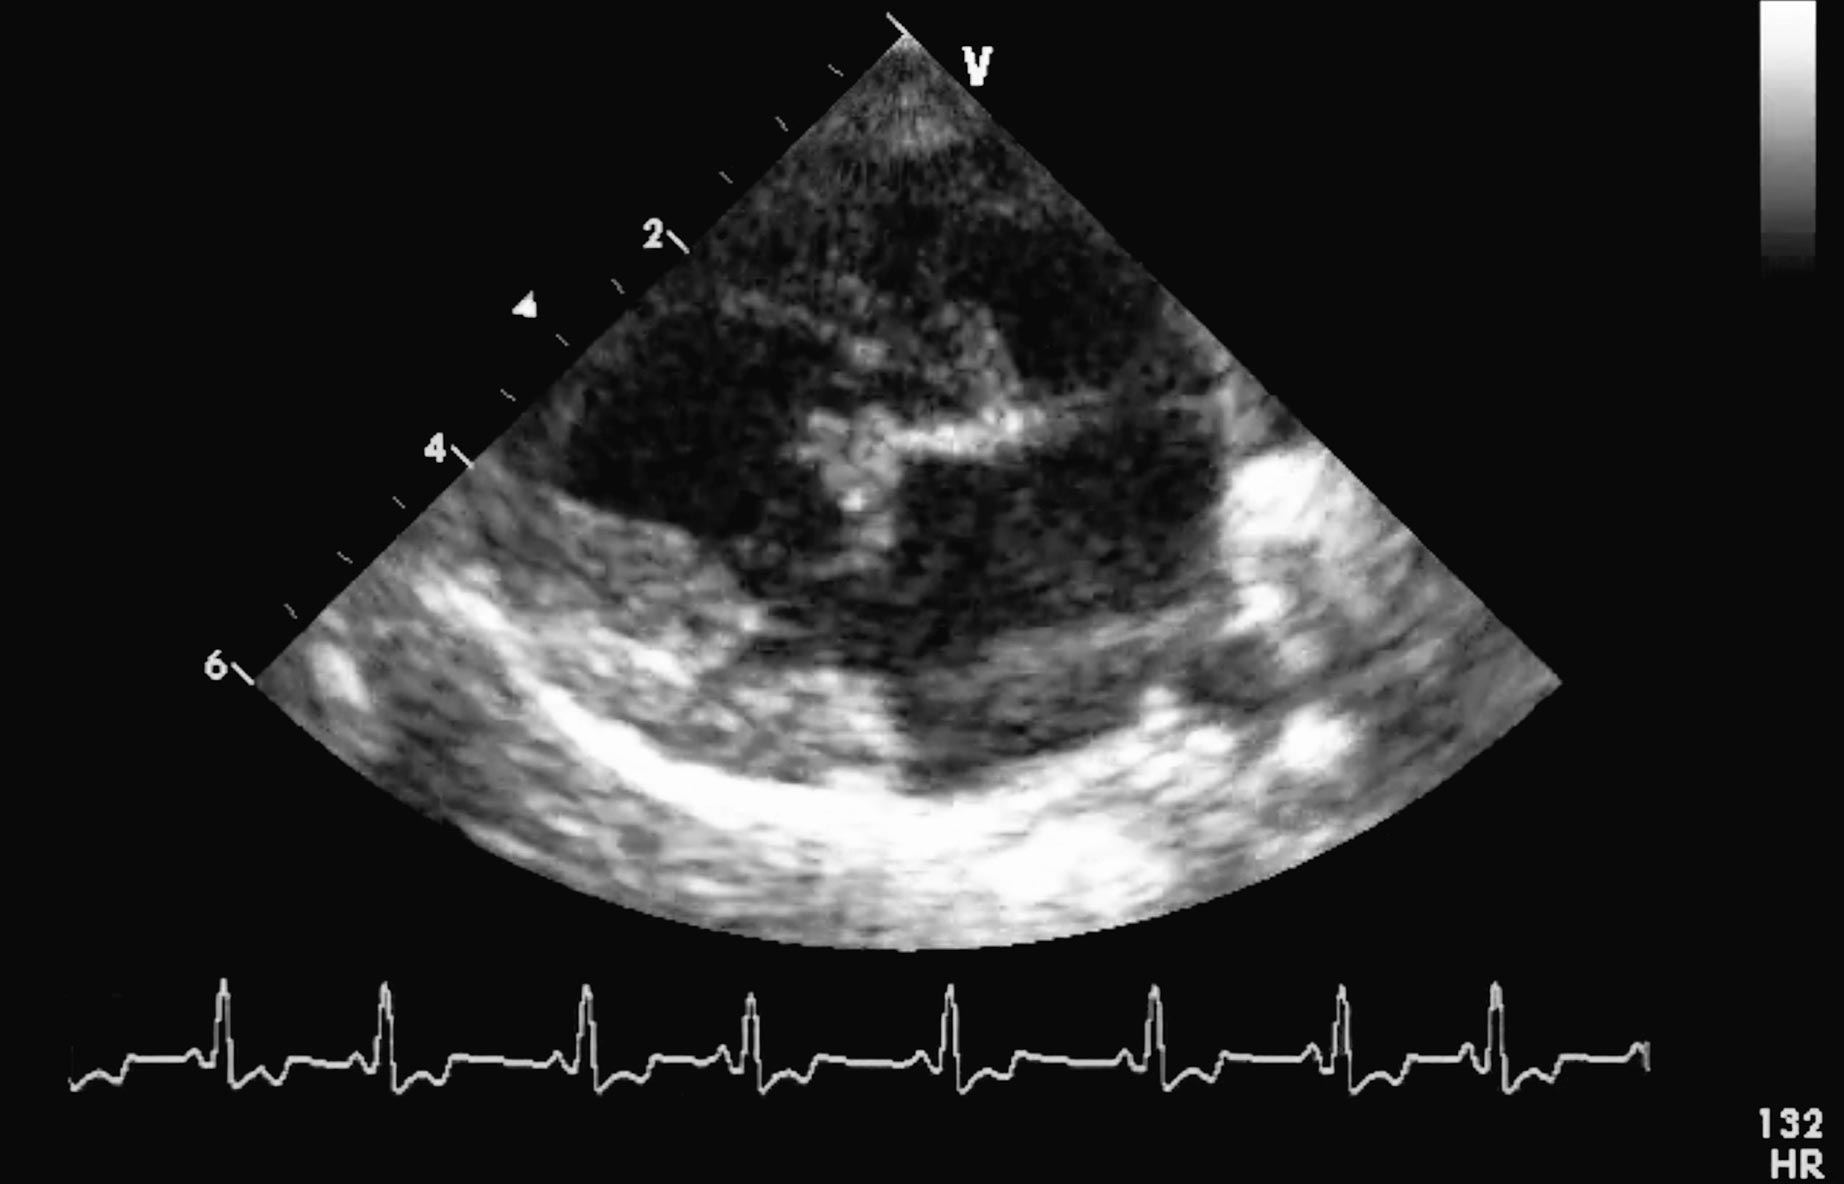 Figure 1. Right parasternal long-axis, four-chamber view of the heart of a 12-year-old male neutered Chihuahua with grade four to grade five, left apical, systolic murmur classified with stage B2 degenerative mitral valve disease. The septal mitral valve cusp is irregular, thickened and prolapsing. The left ventricle appears dilated. Normalised (for body surface area) left ventricular internal diameter during diastole was 1.8 (reference less than 1.7), consistent with eccentric hypertrophy. The left atrium appears enlarged.